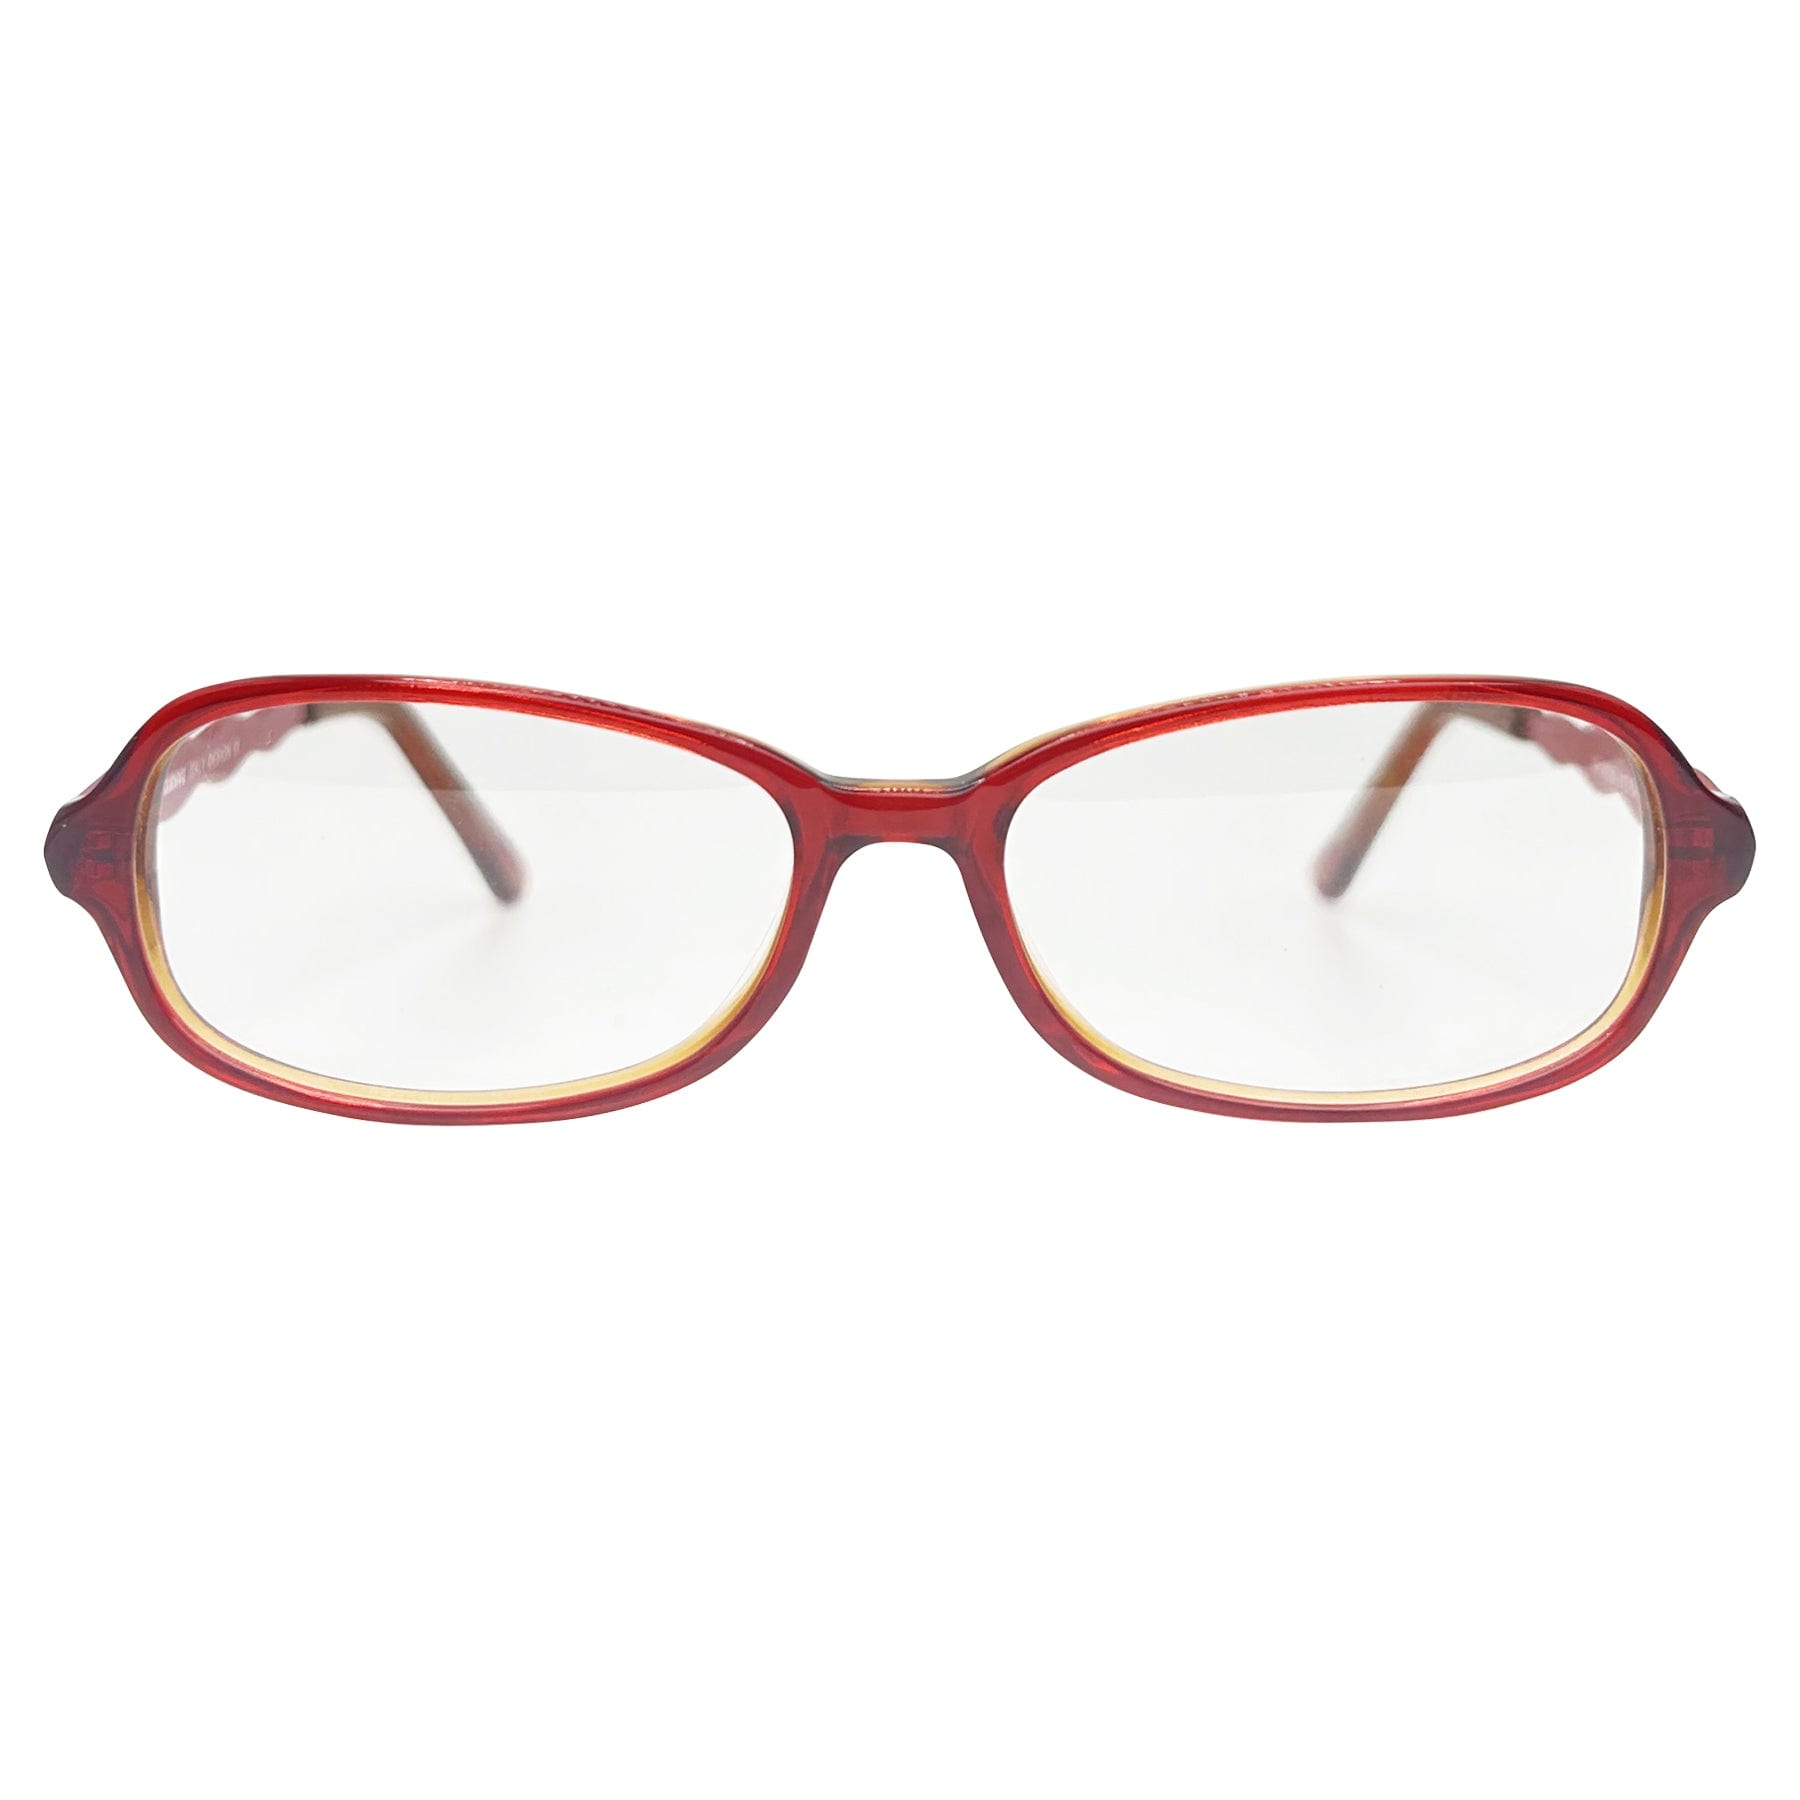 unique clear lens vintage frames with pink metal arms and cherry color